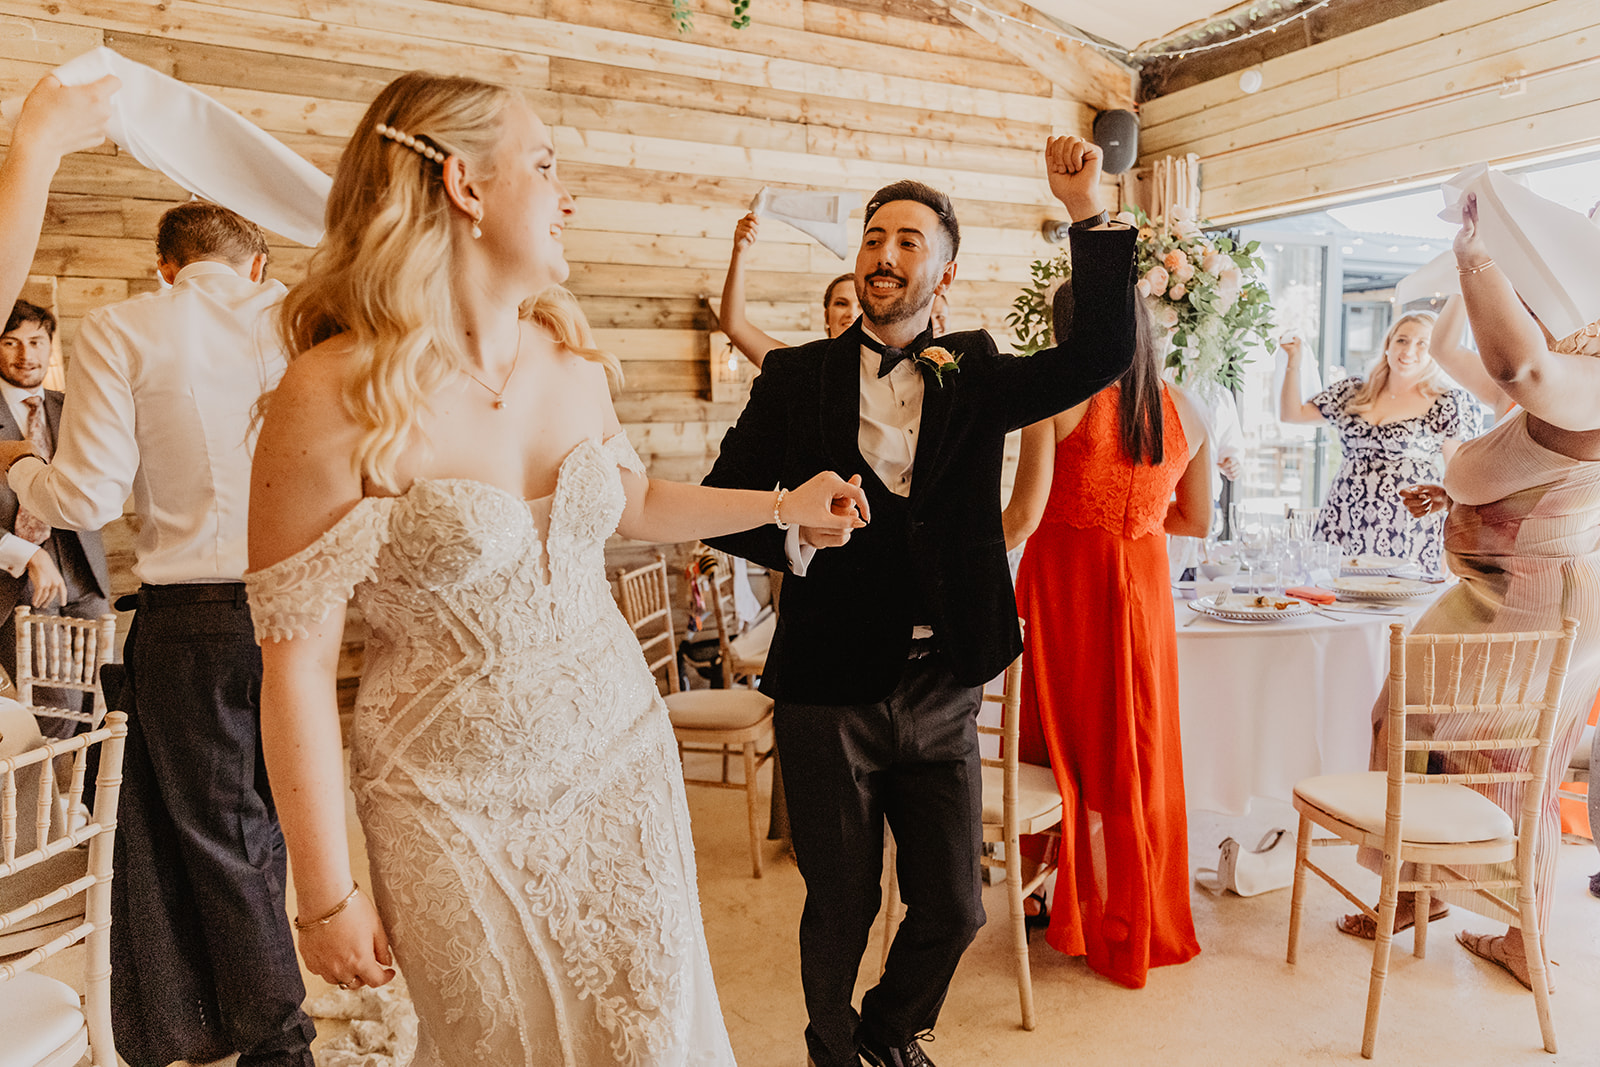 Bride and groom arriving at reception at a Southlands barn wedding, Sussex. Photo by OliveJoy Photography.